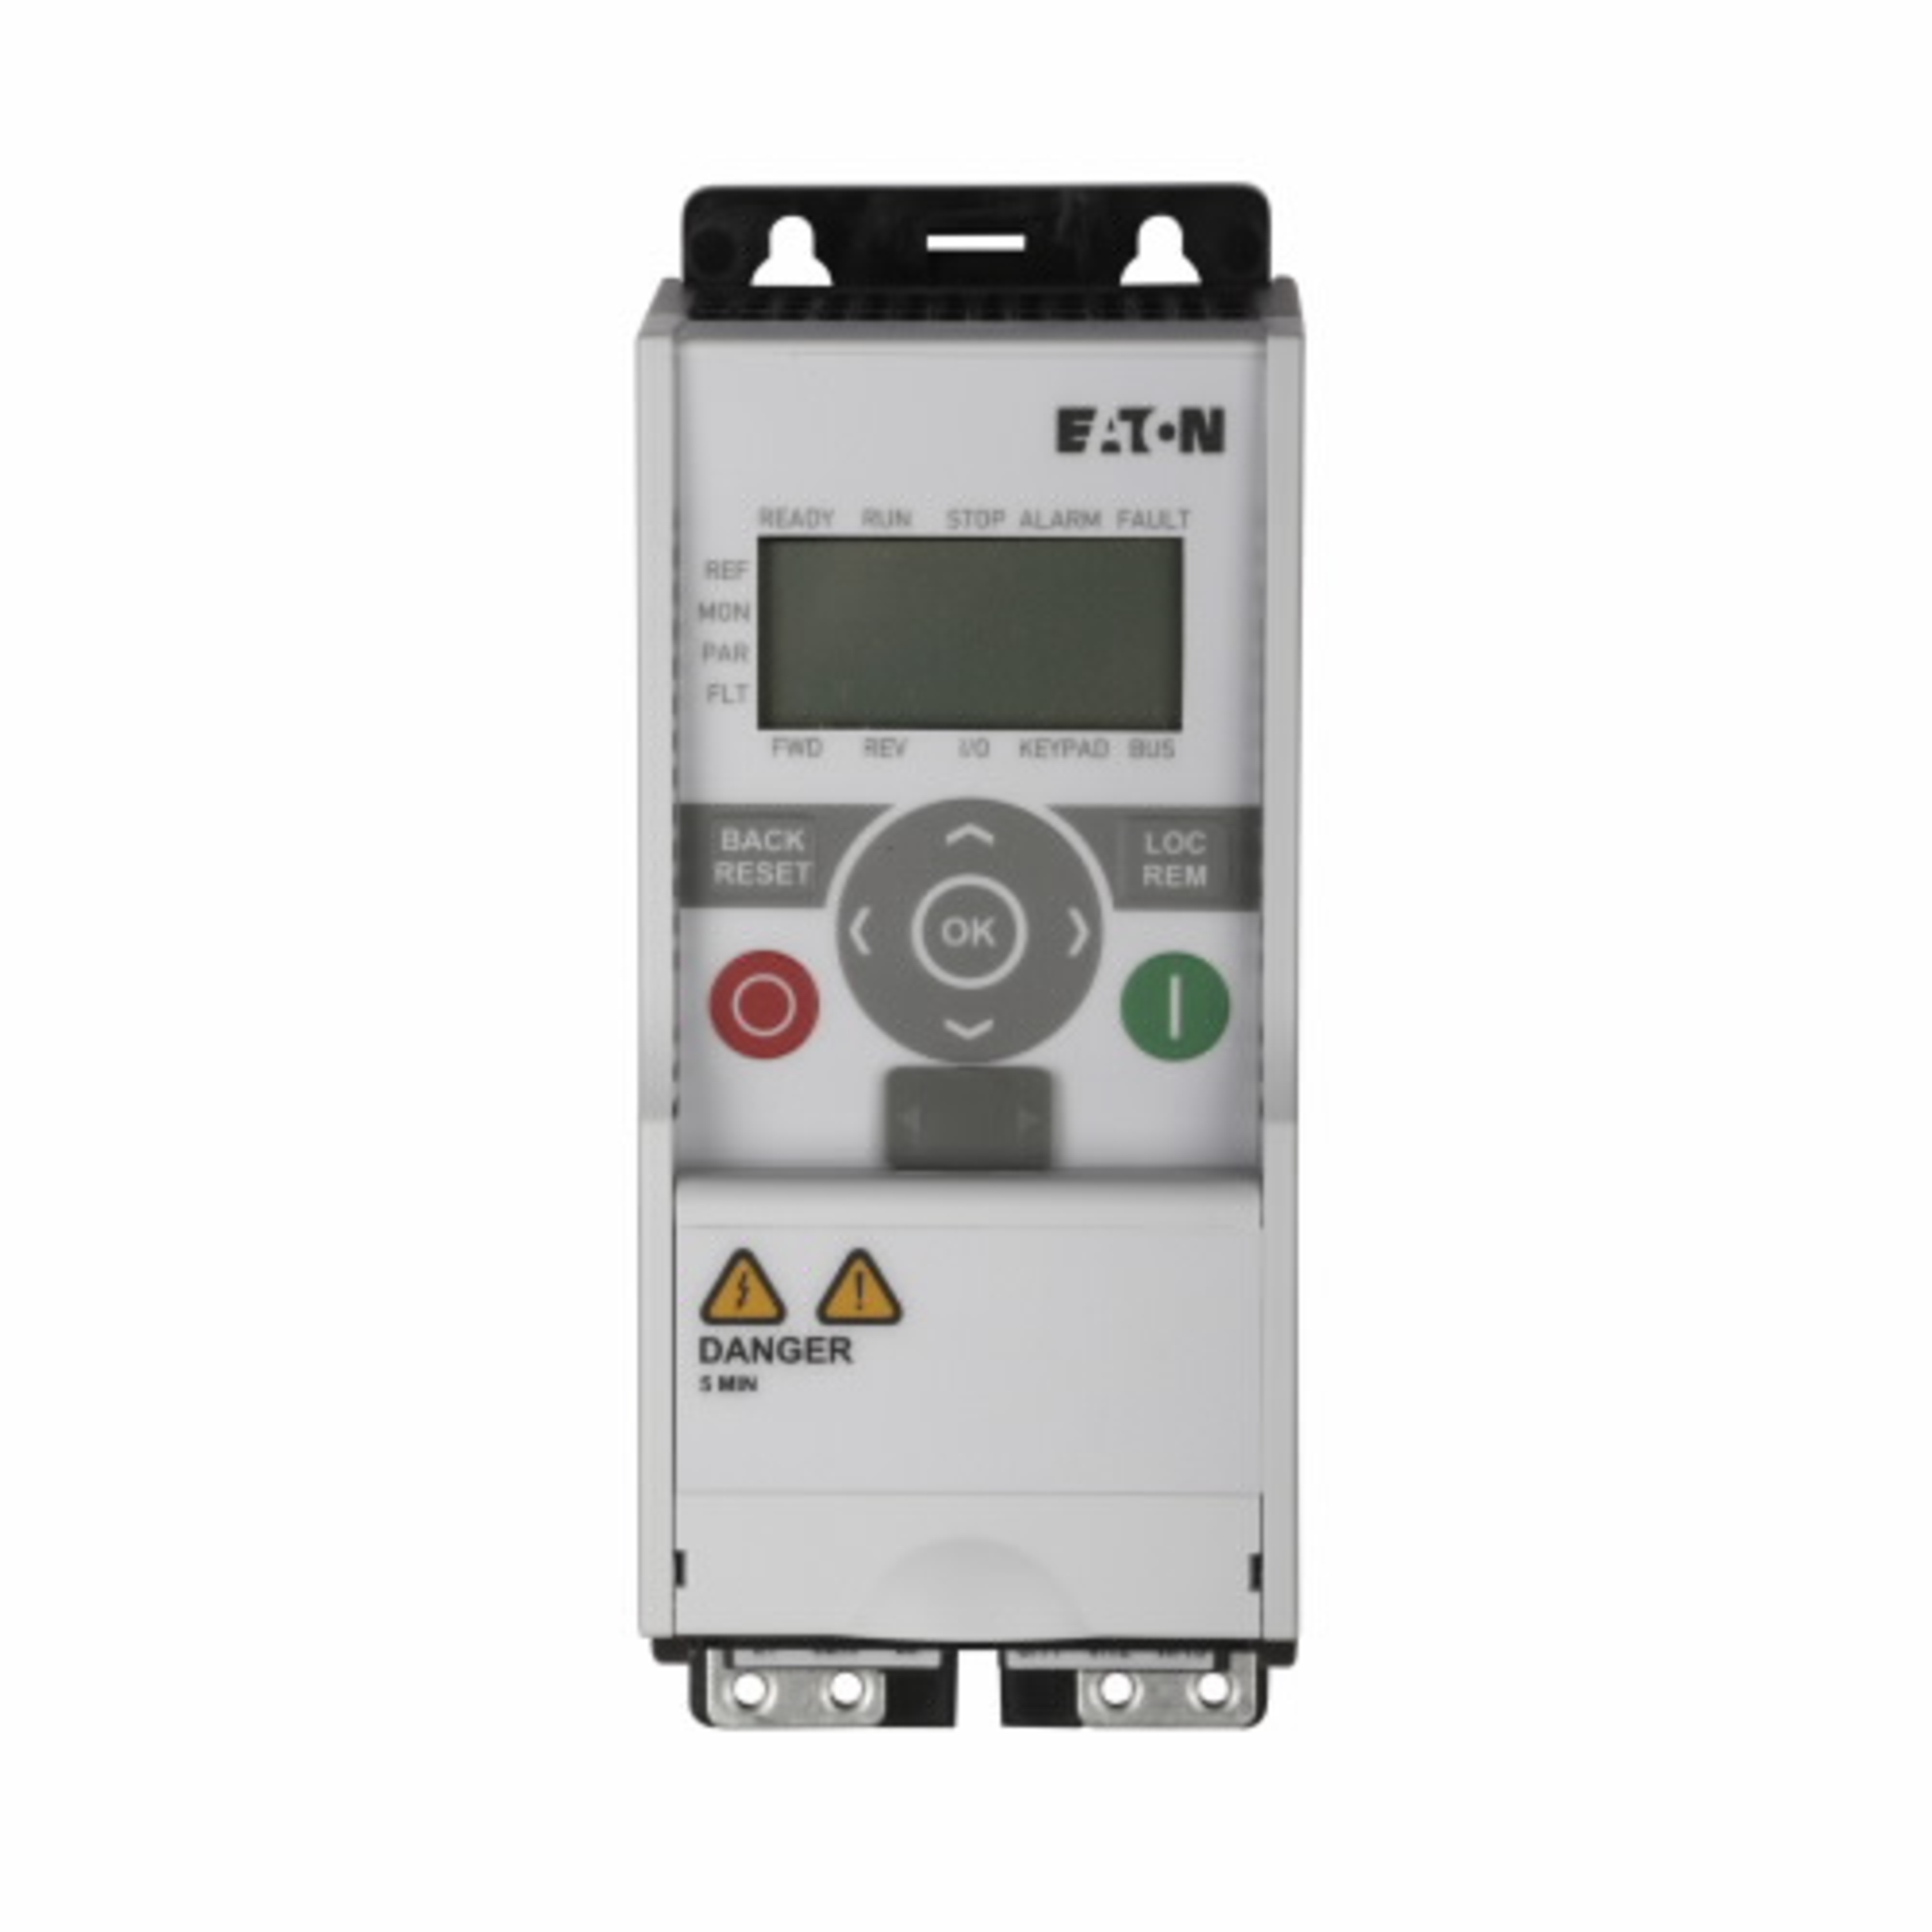 Eaton MMX12AA3D7N0-0 Eaton | Cutler Hammer MMX12AA3D7N0-0  Variable Frequency Drives AC Drives – 240VAC – 1 Phase https://gesrepair.com/wp-content/uploads/2022/Eaton/Images/Eaton_MMX12AA3D7N0-0_Variable_Frequency_Drive.jpg